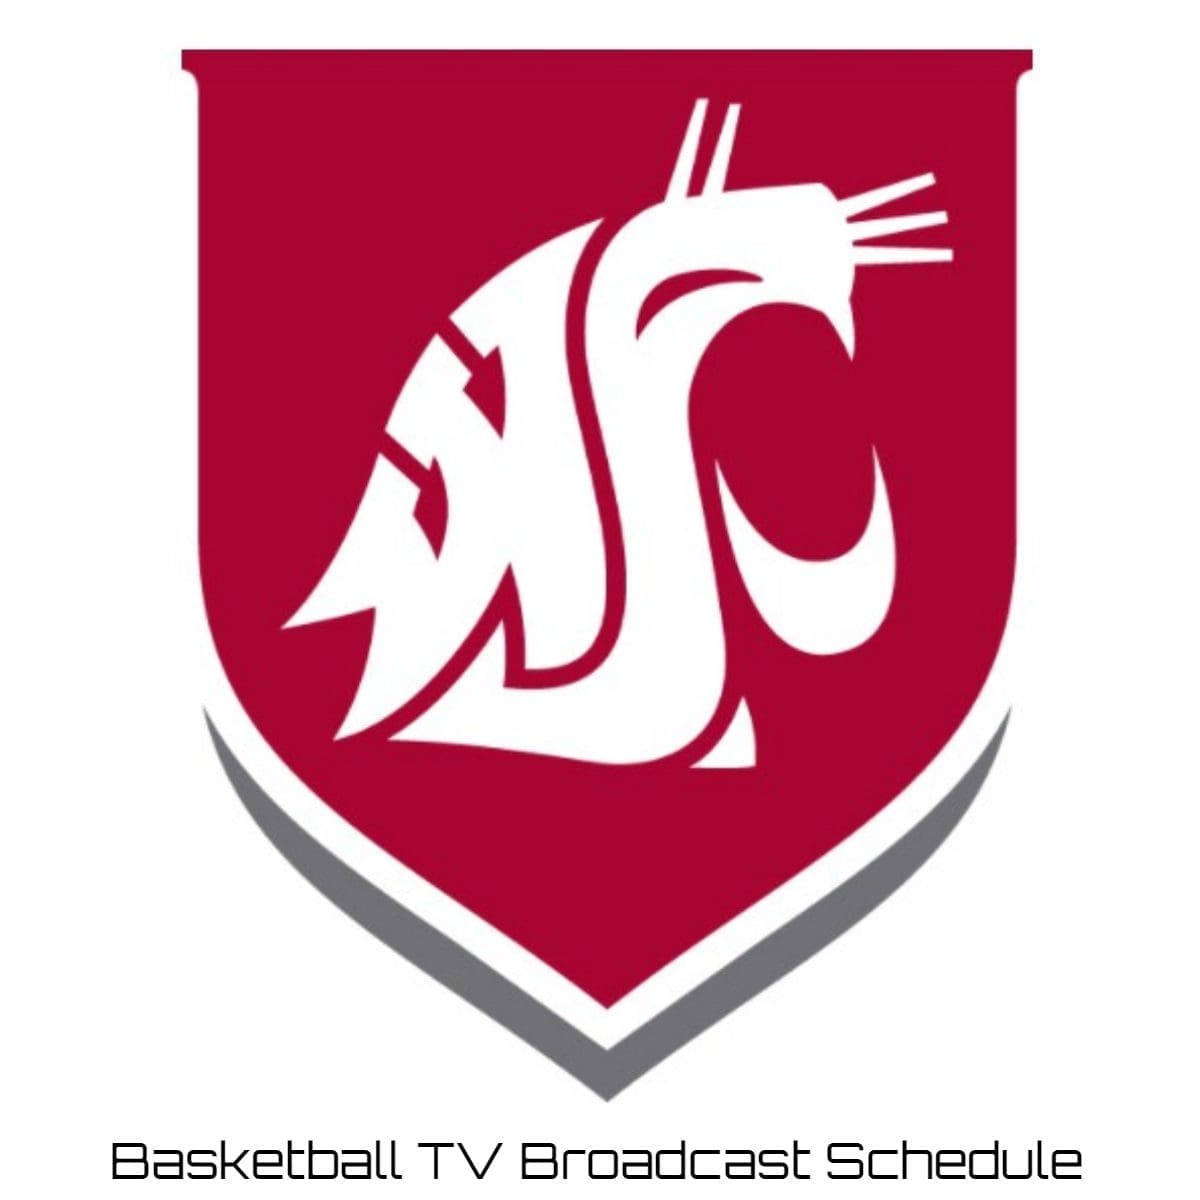 Washington State Cougars Basketball TV Broadcast Schedule